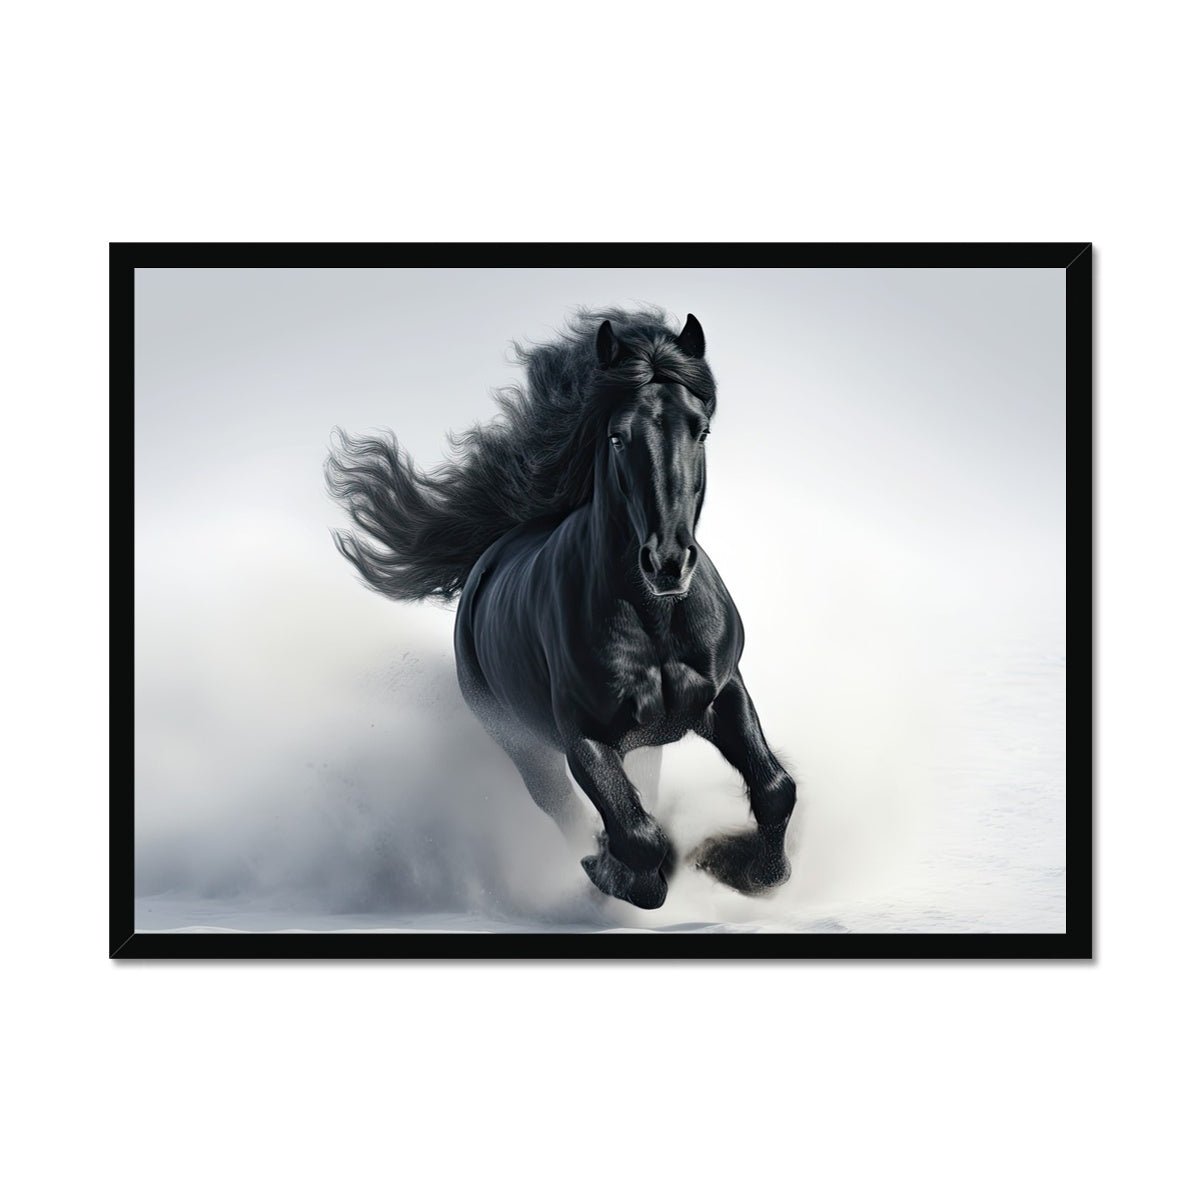 Strength from the Abyss Framed Print - Pixel Gallery